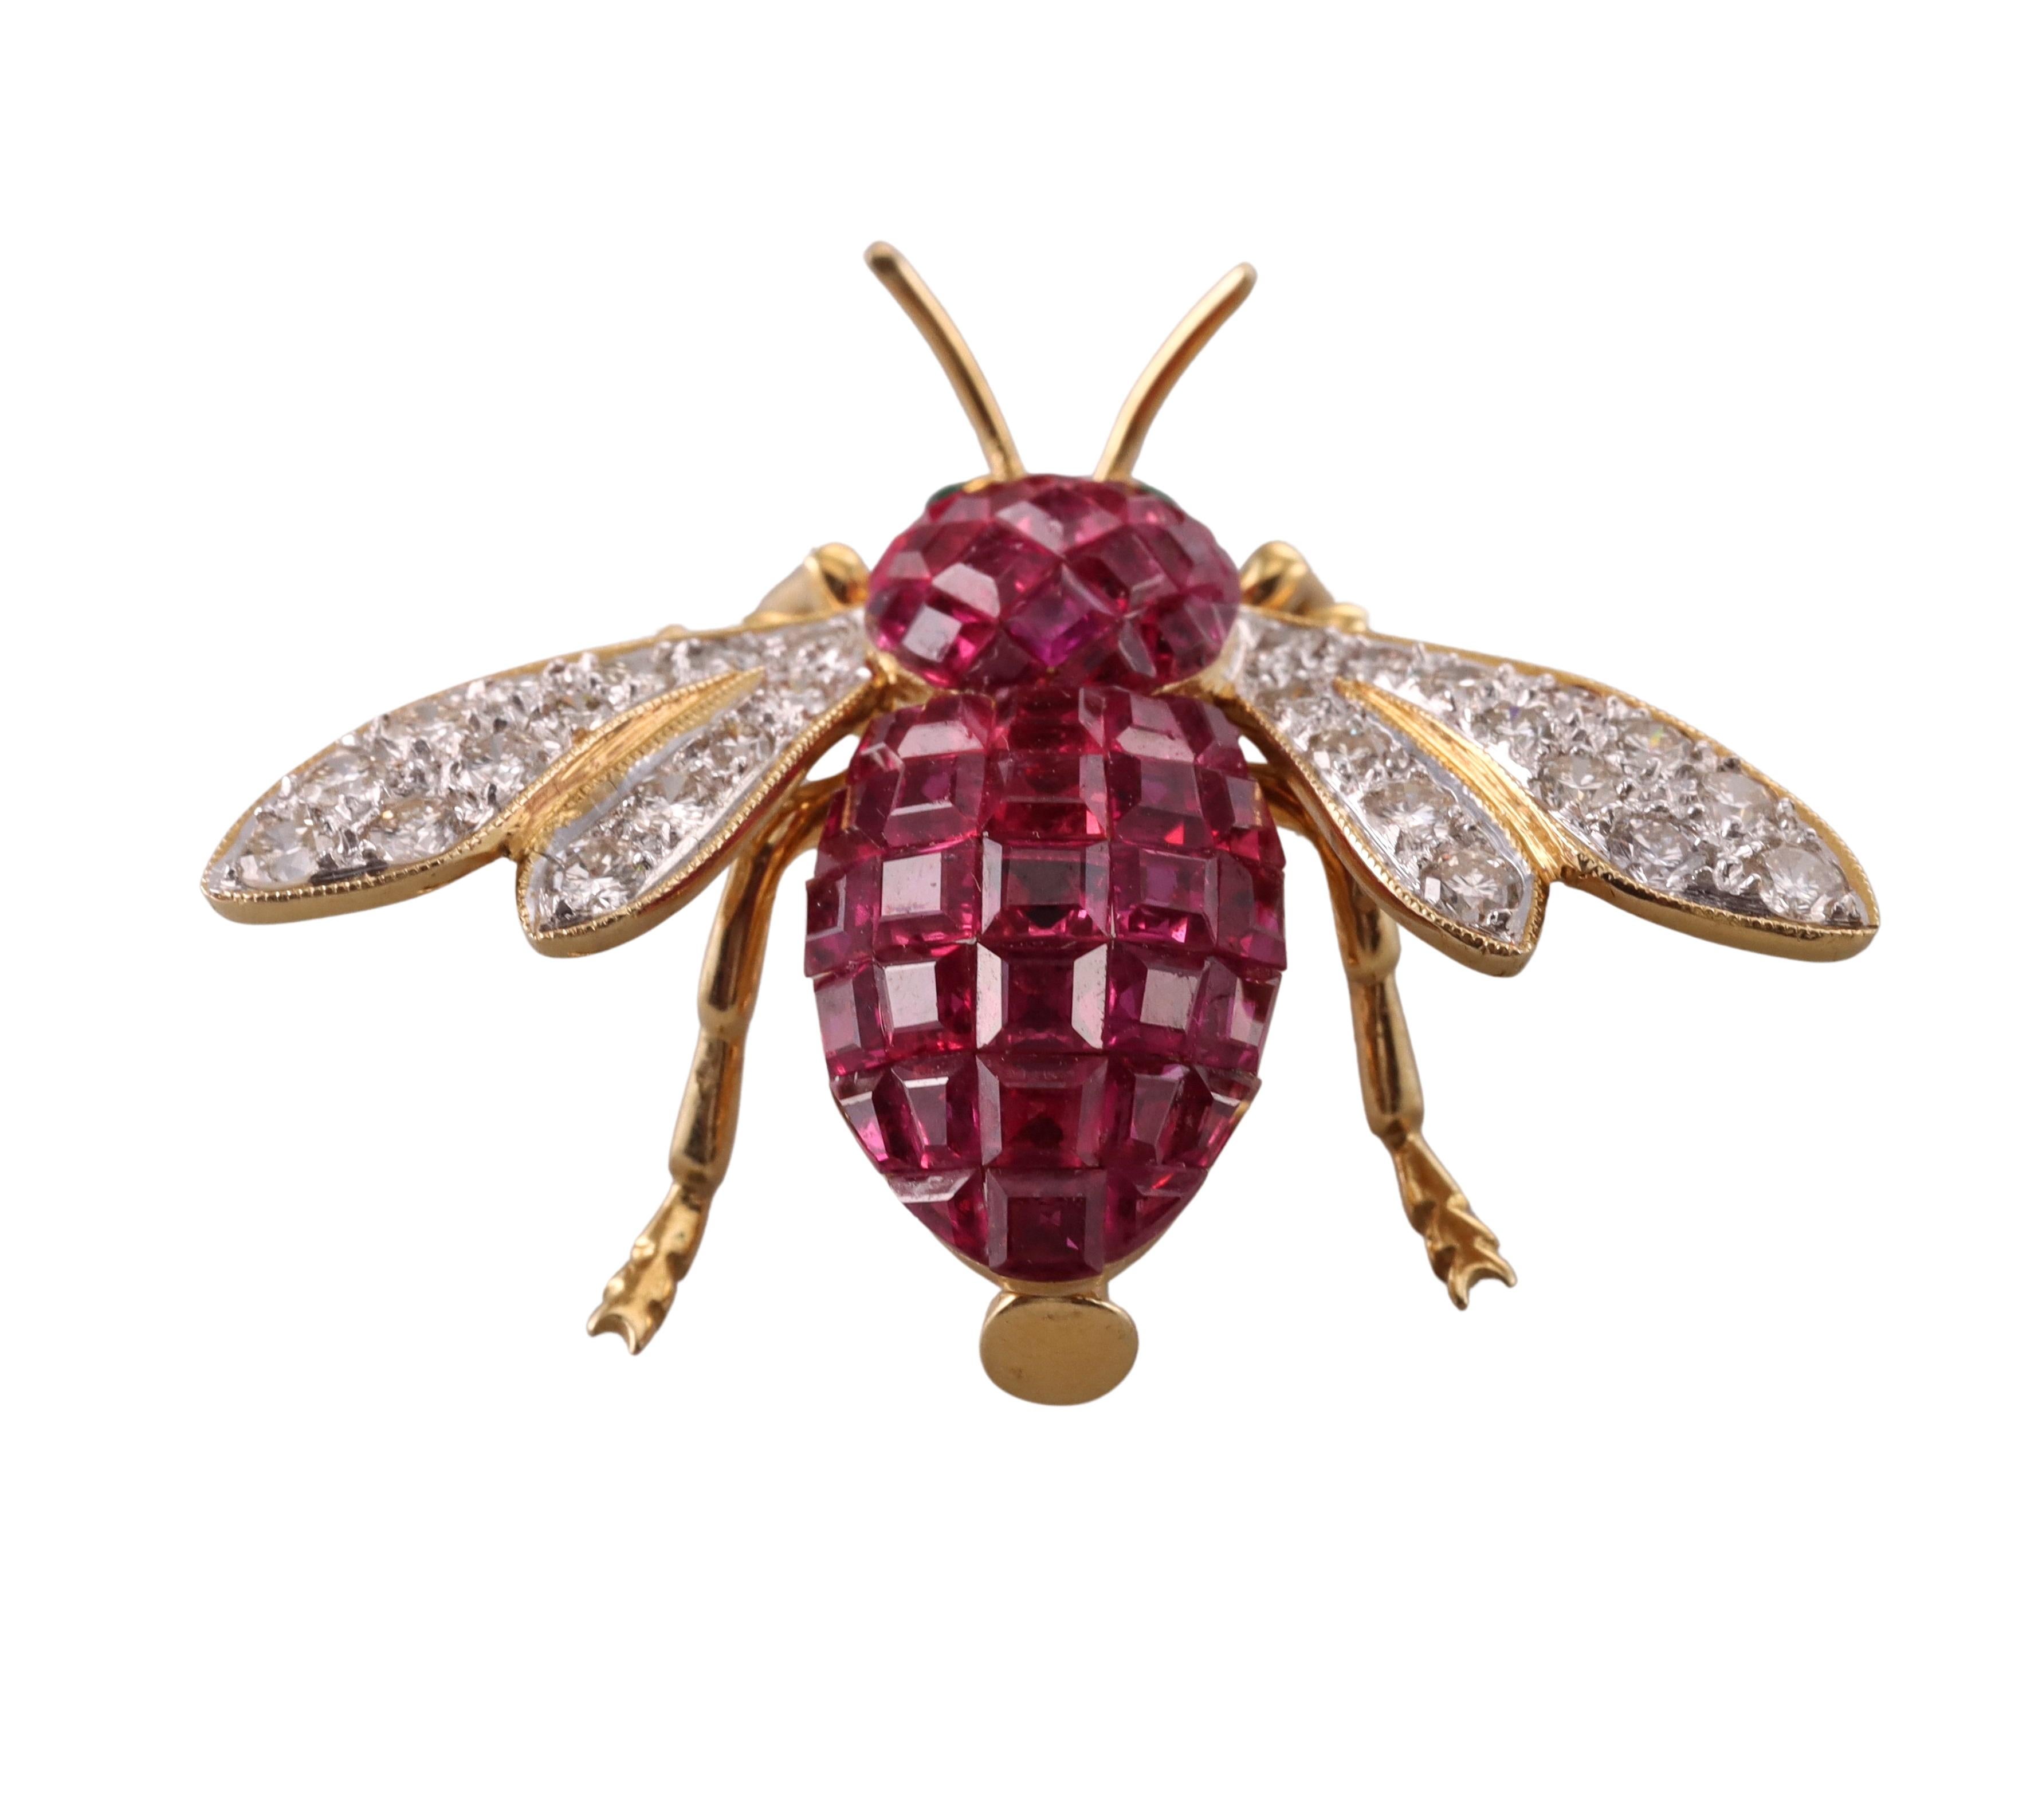 Adorable 18k yellow gold bee brooch, by Italian designer Sabbadini. Featuring invisible set rubies and approximately 0.80ctw in G/VS diamonds, with emerald eyes. The brooch measures 1 1/8